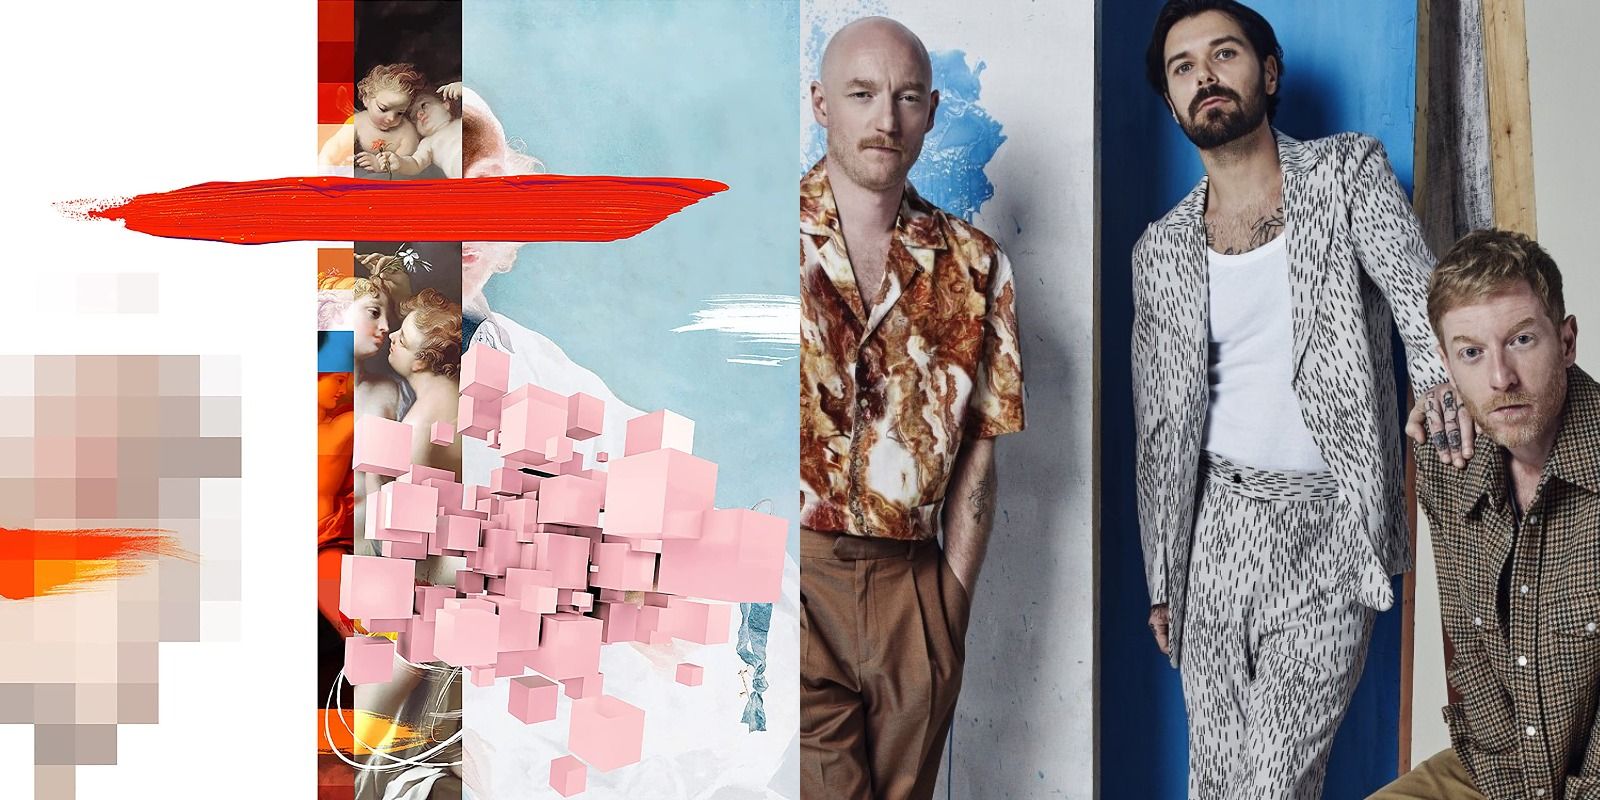 Split image of the album cover of The Myth of Happily Ever After and Biffy Clyro